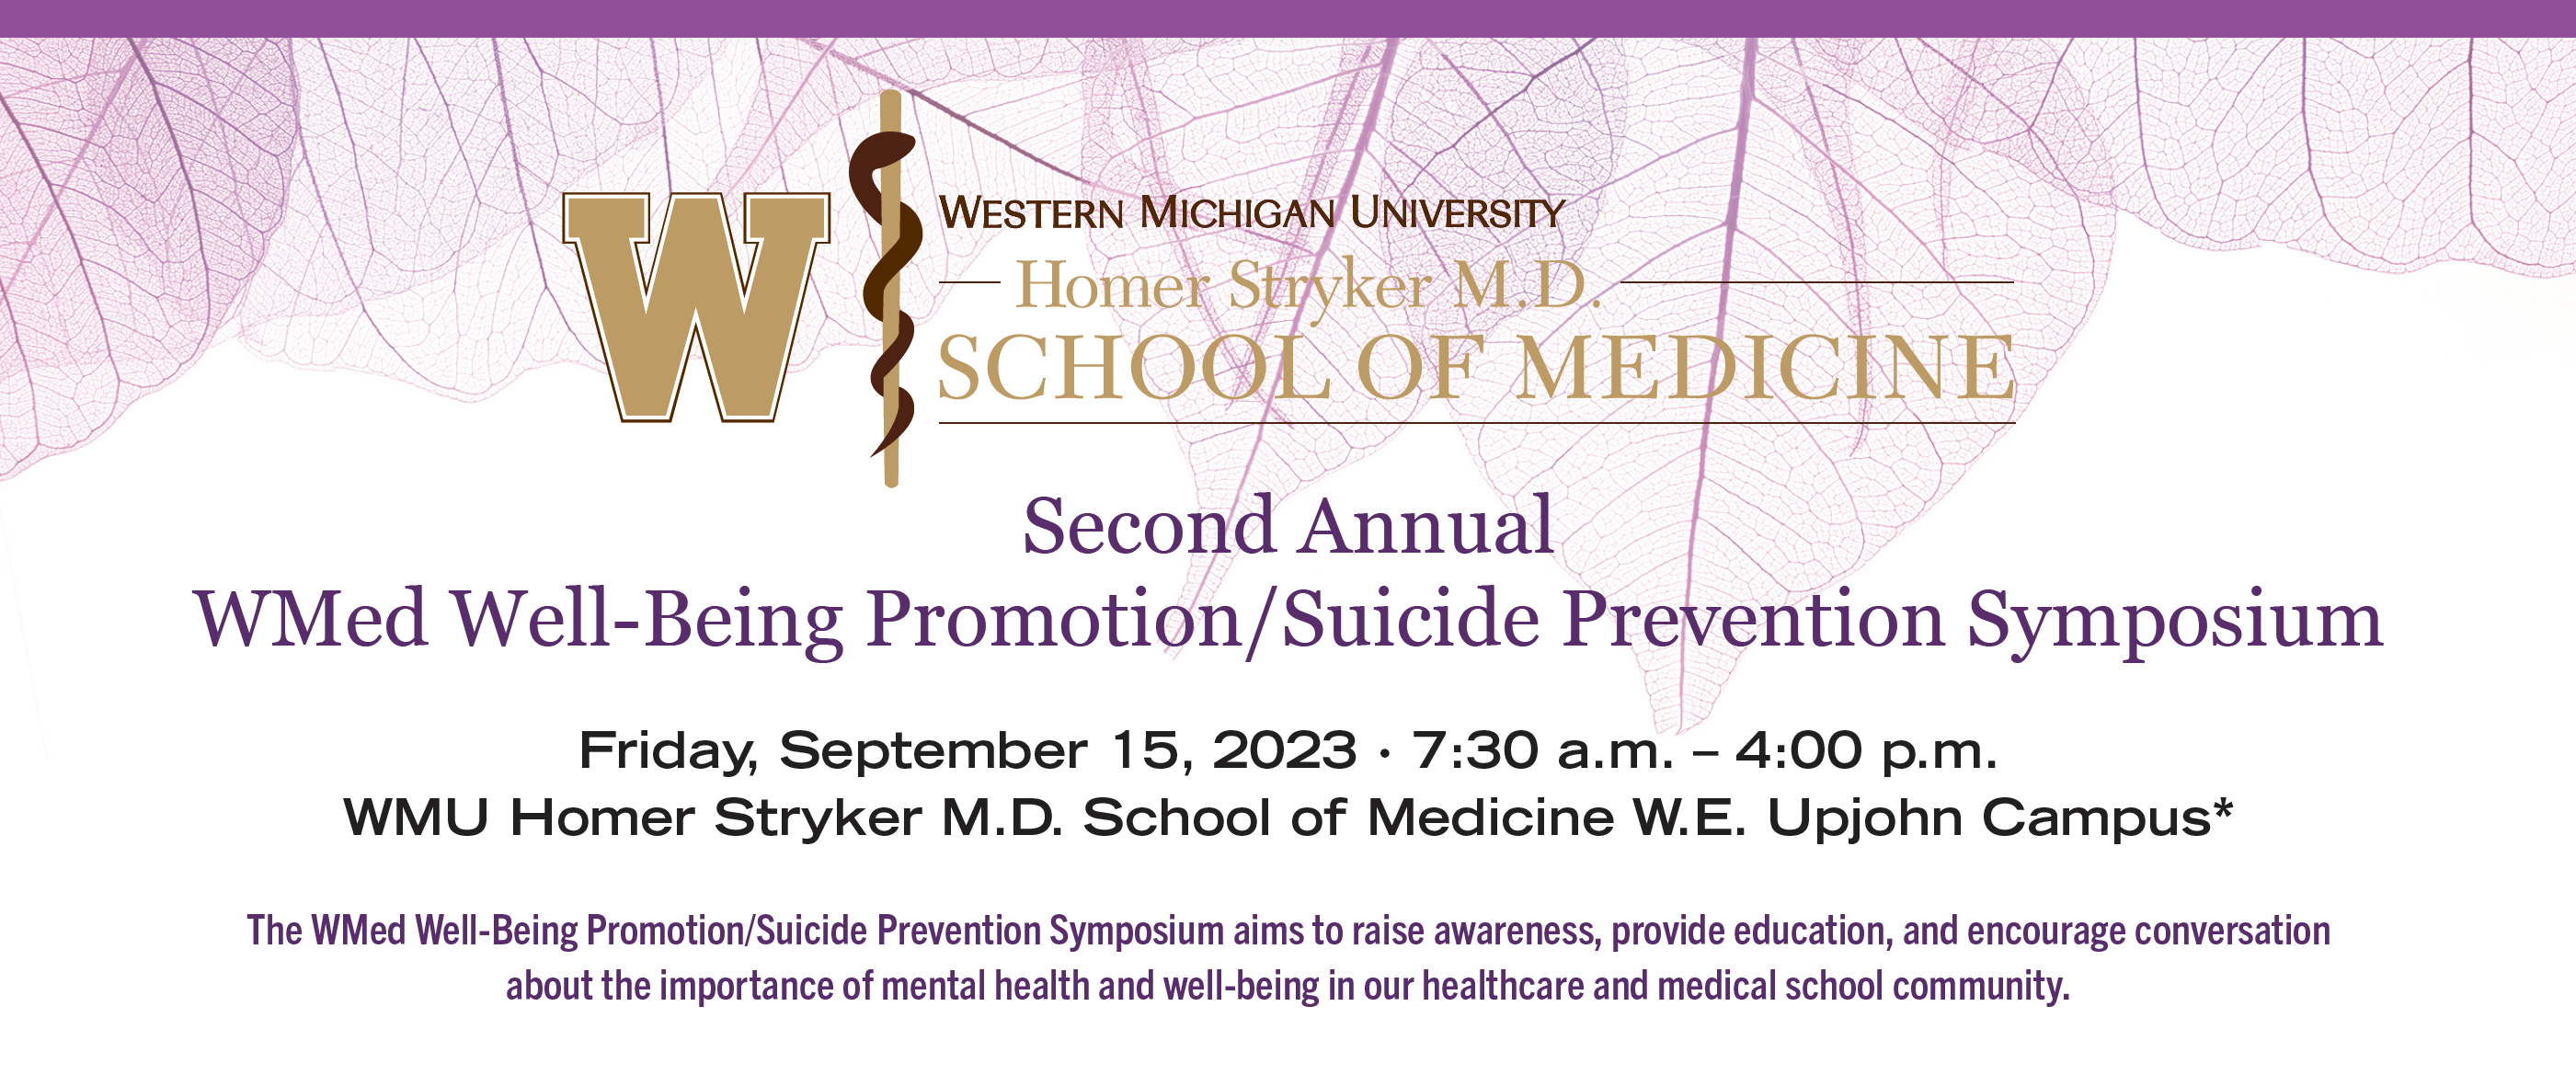 Second Annual WMed Well-Being Promotion/Suicide Prevention Symposium